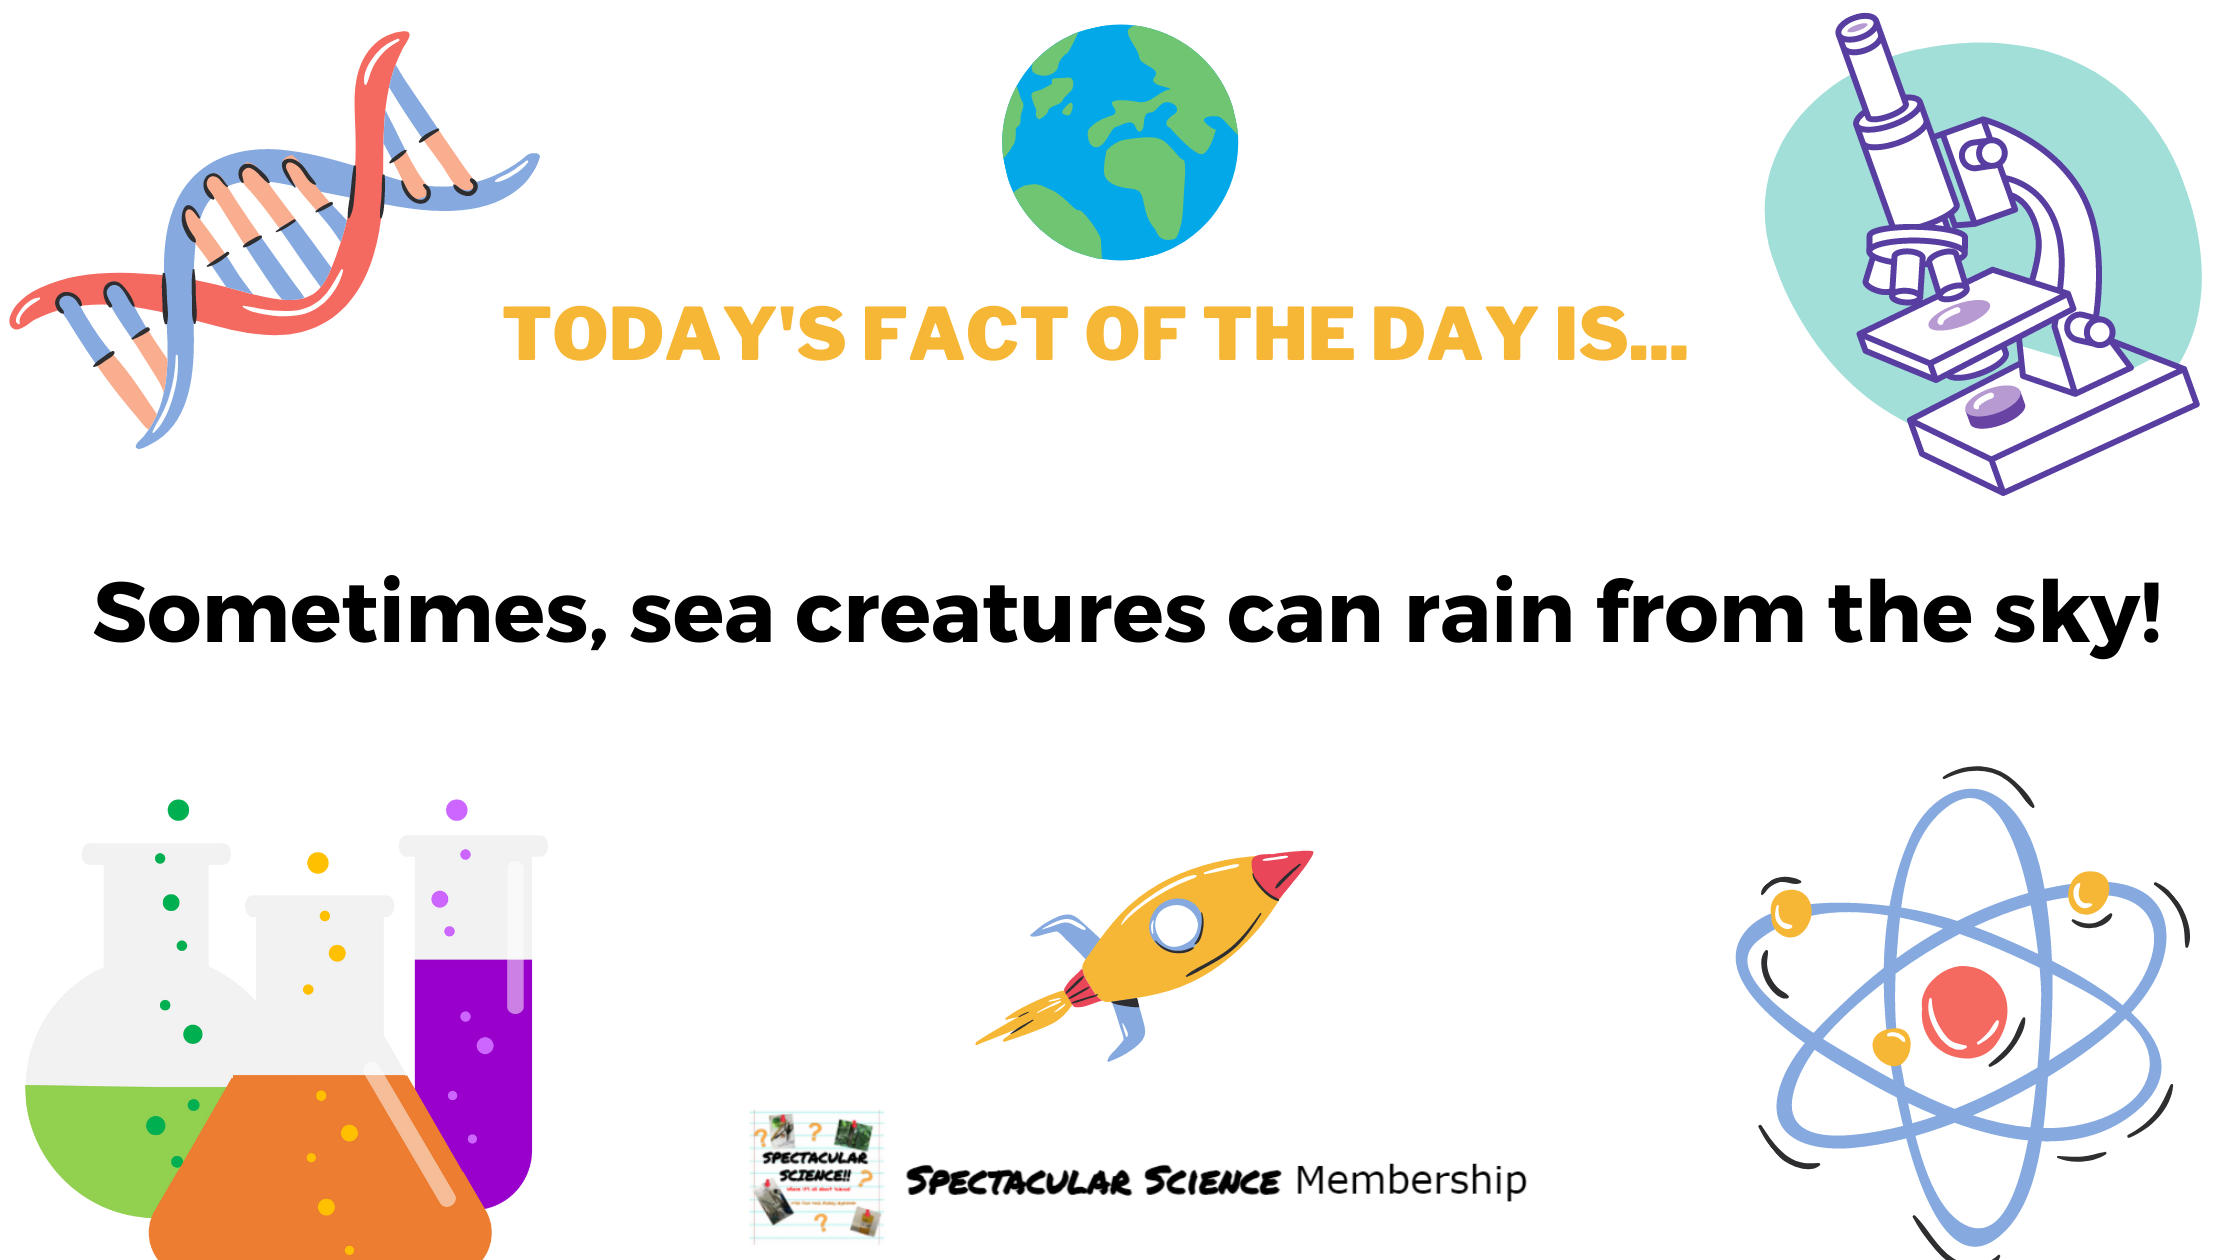 Fact of the Day Image Dec. 17th